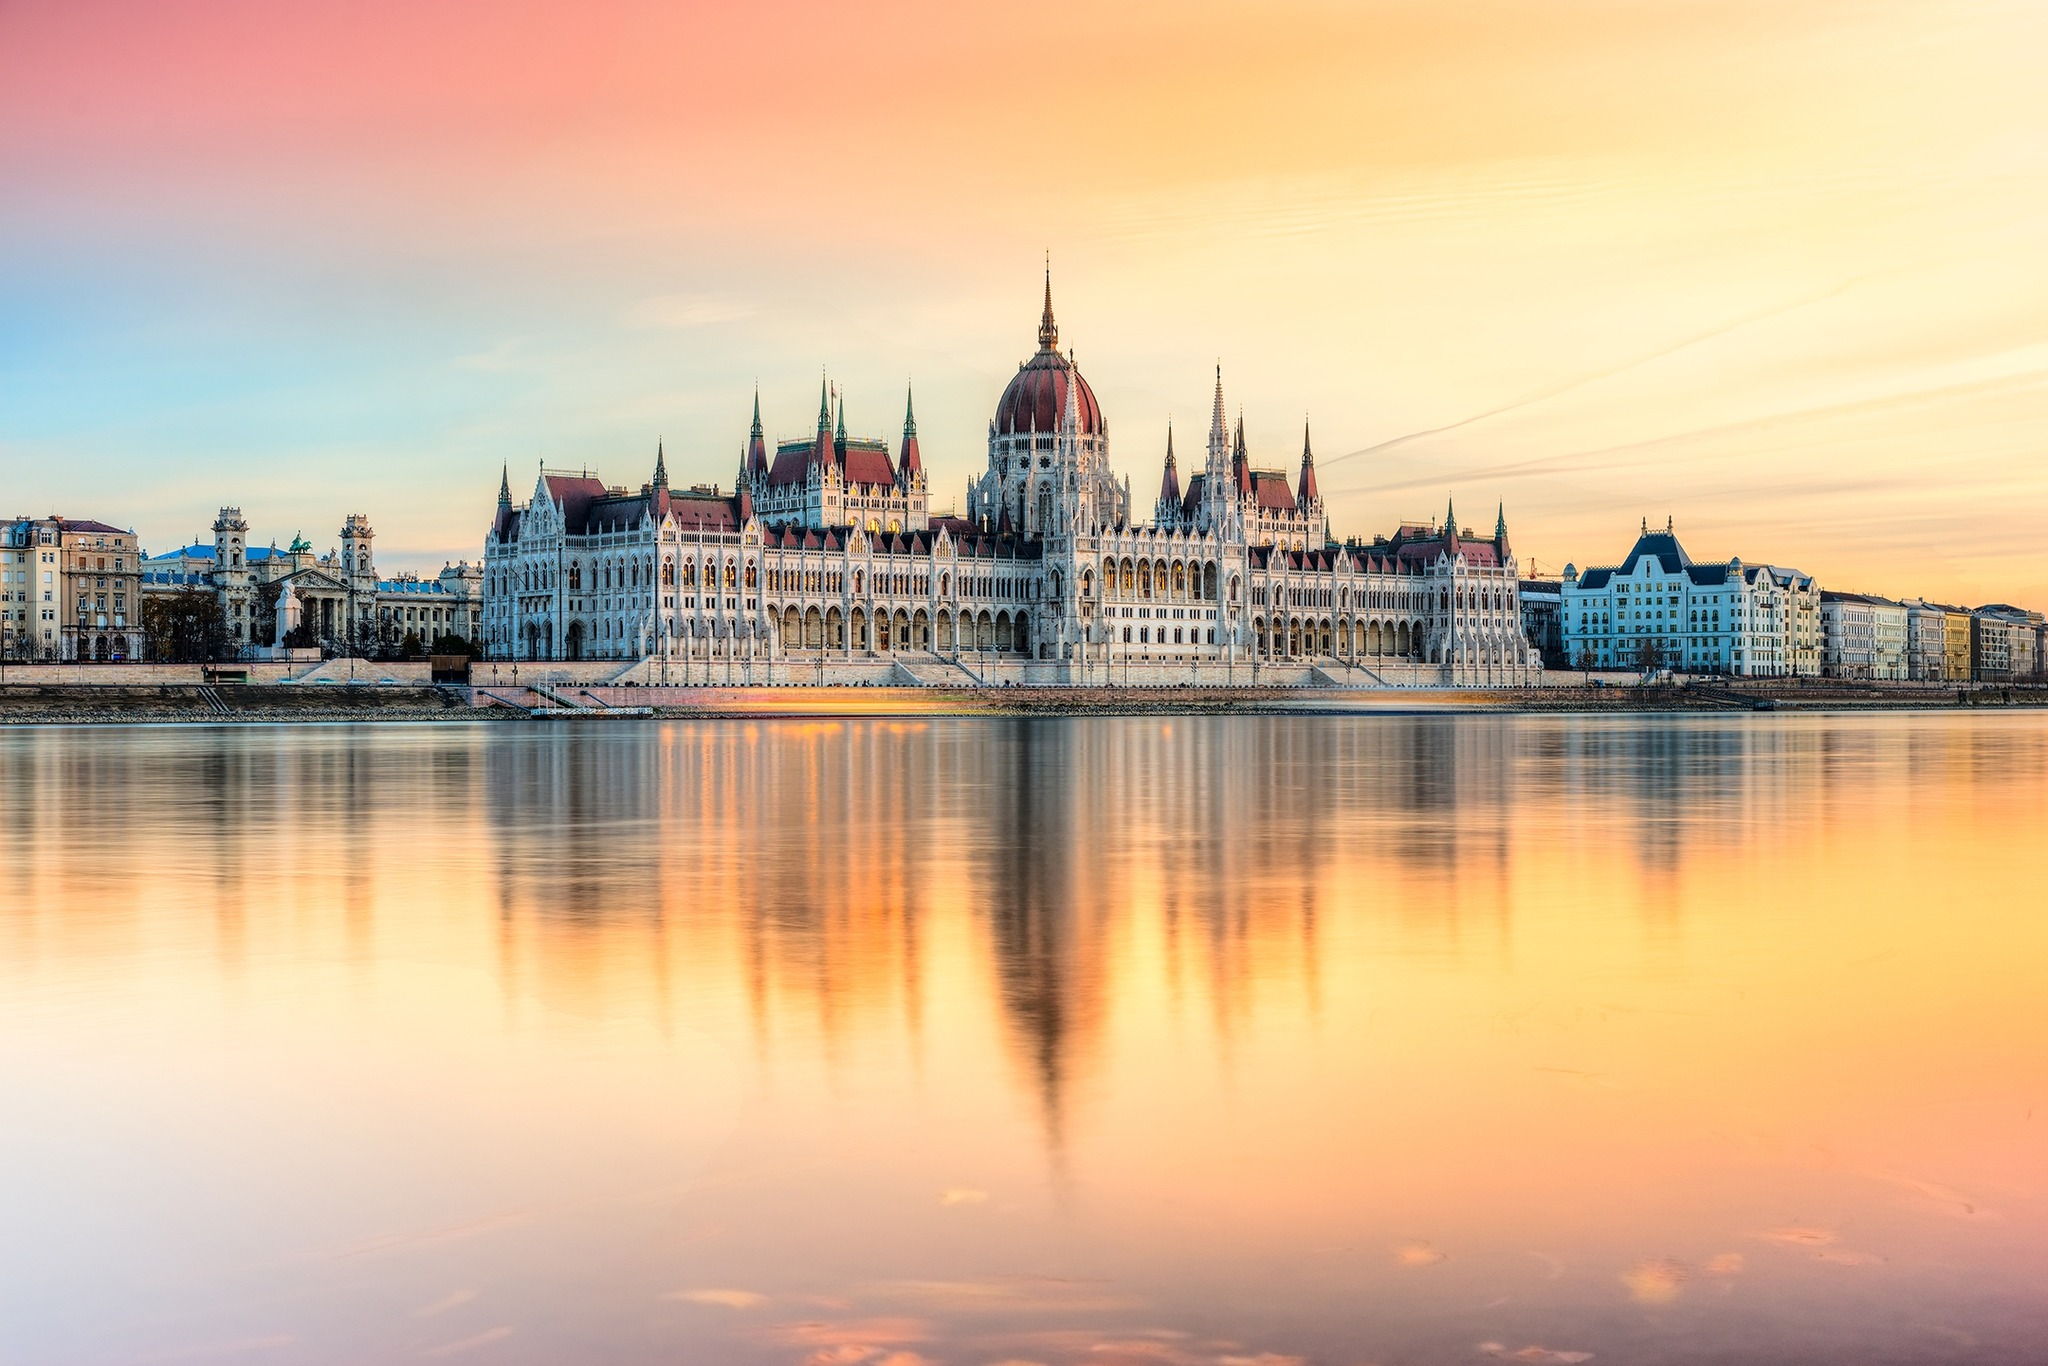 Budapest parliament from across the river